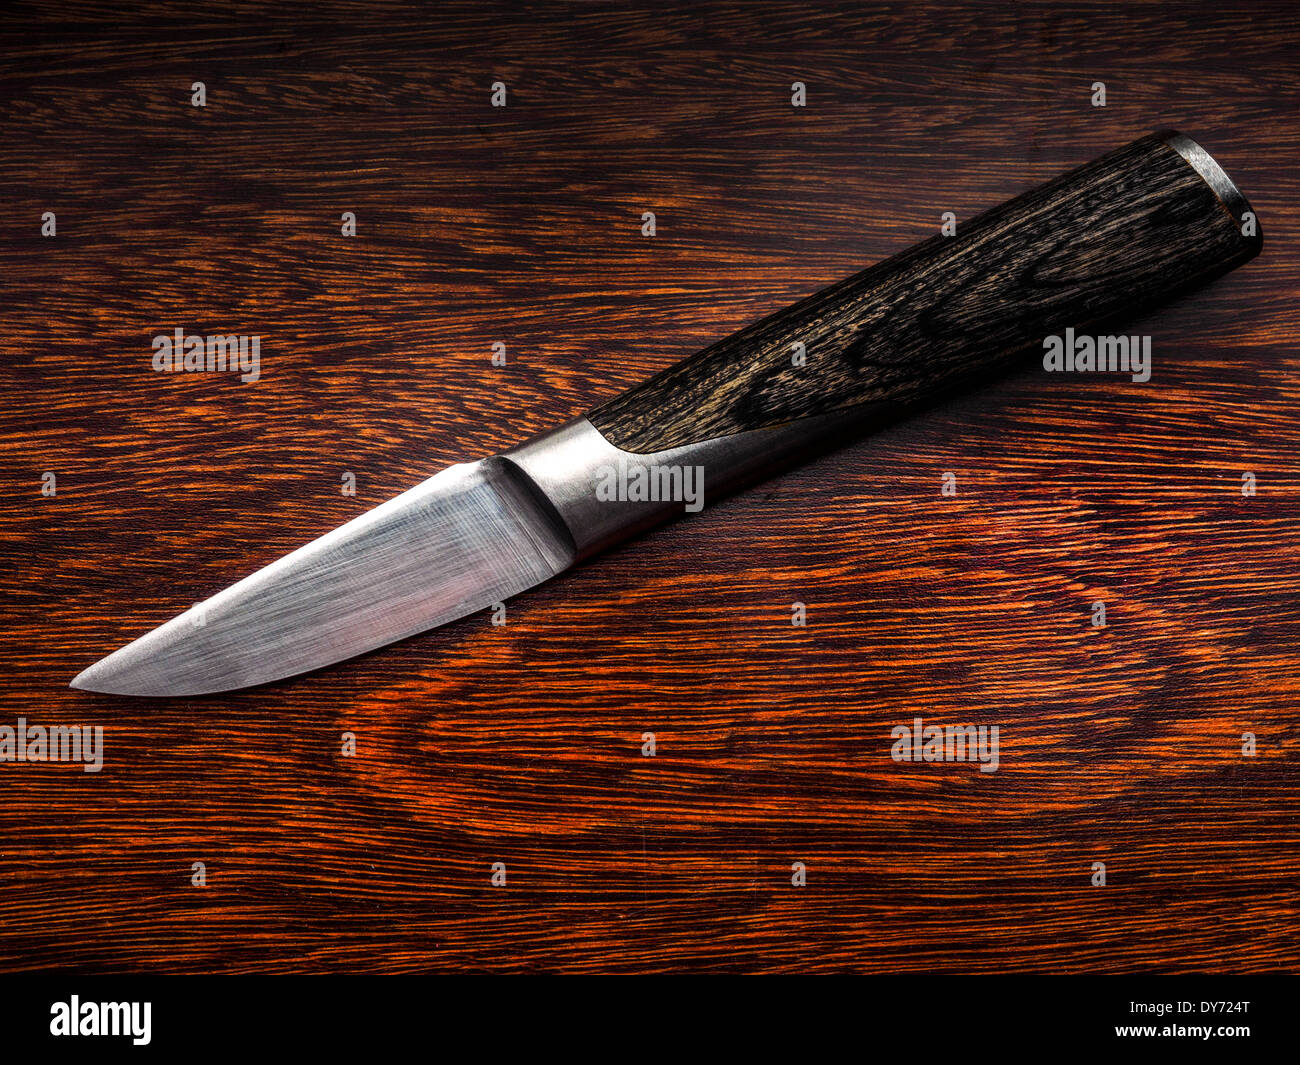 Kitchen paring knife with wooden handle Stock Photo